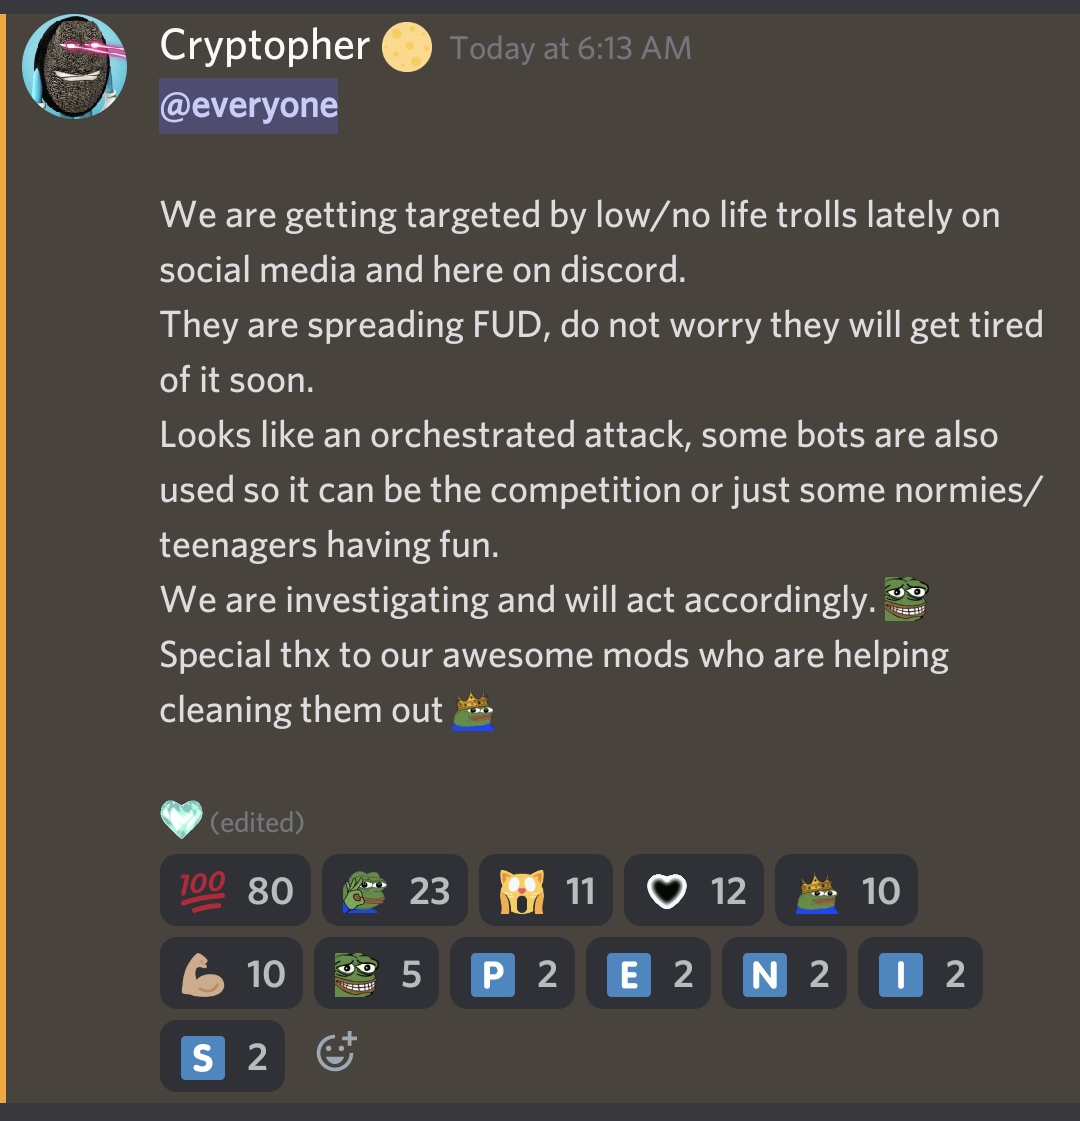 Discord message from "Cryptopher": @everyone We are getting targeted by low/no life trolls lately on social media and here on discord. They are spreading FUD, do not worry they will get tired of it soon. Looks like an orchestrated attack, some bots are also used so it can be the competition or just some normies/teenagers having fun. We are investigating and will act accordingly. [Pepe the frog grimace emoji] Special thx to our awesome mods who are helping cleaning them out [Pepe the frog emoji with crown]"